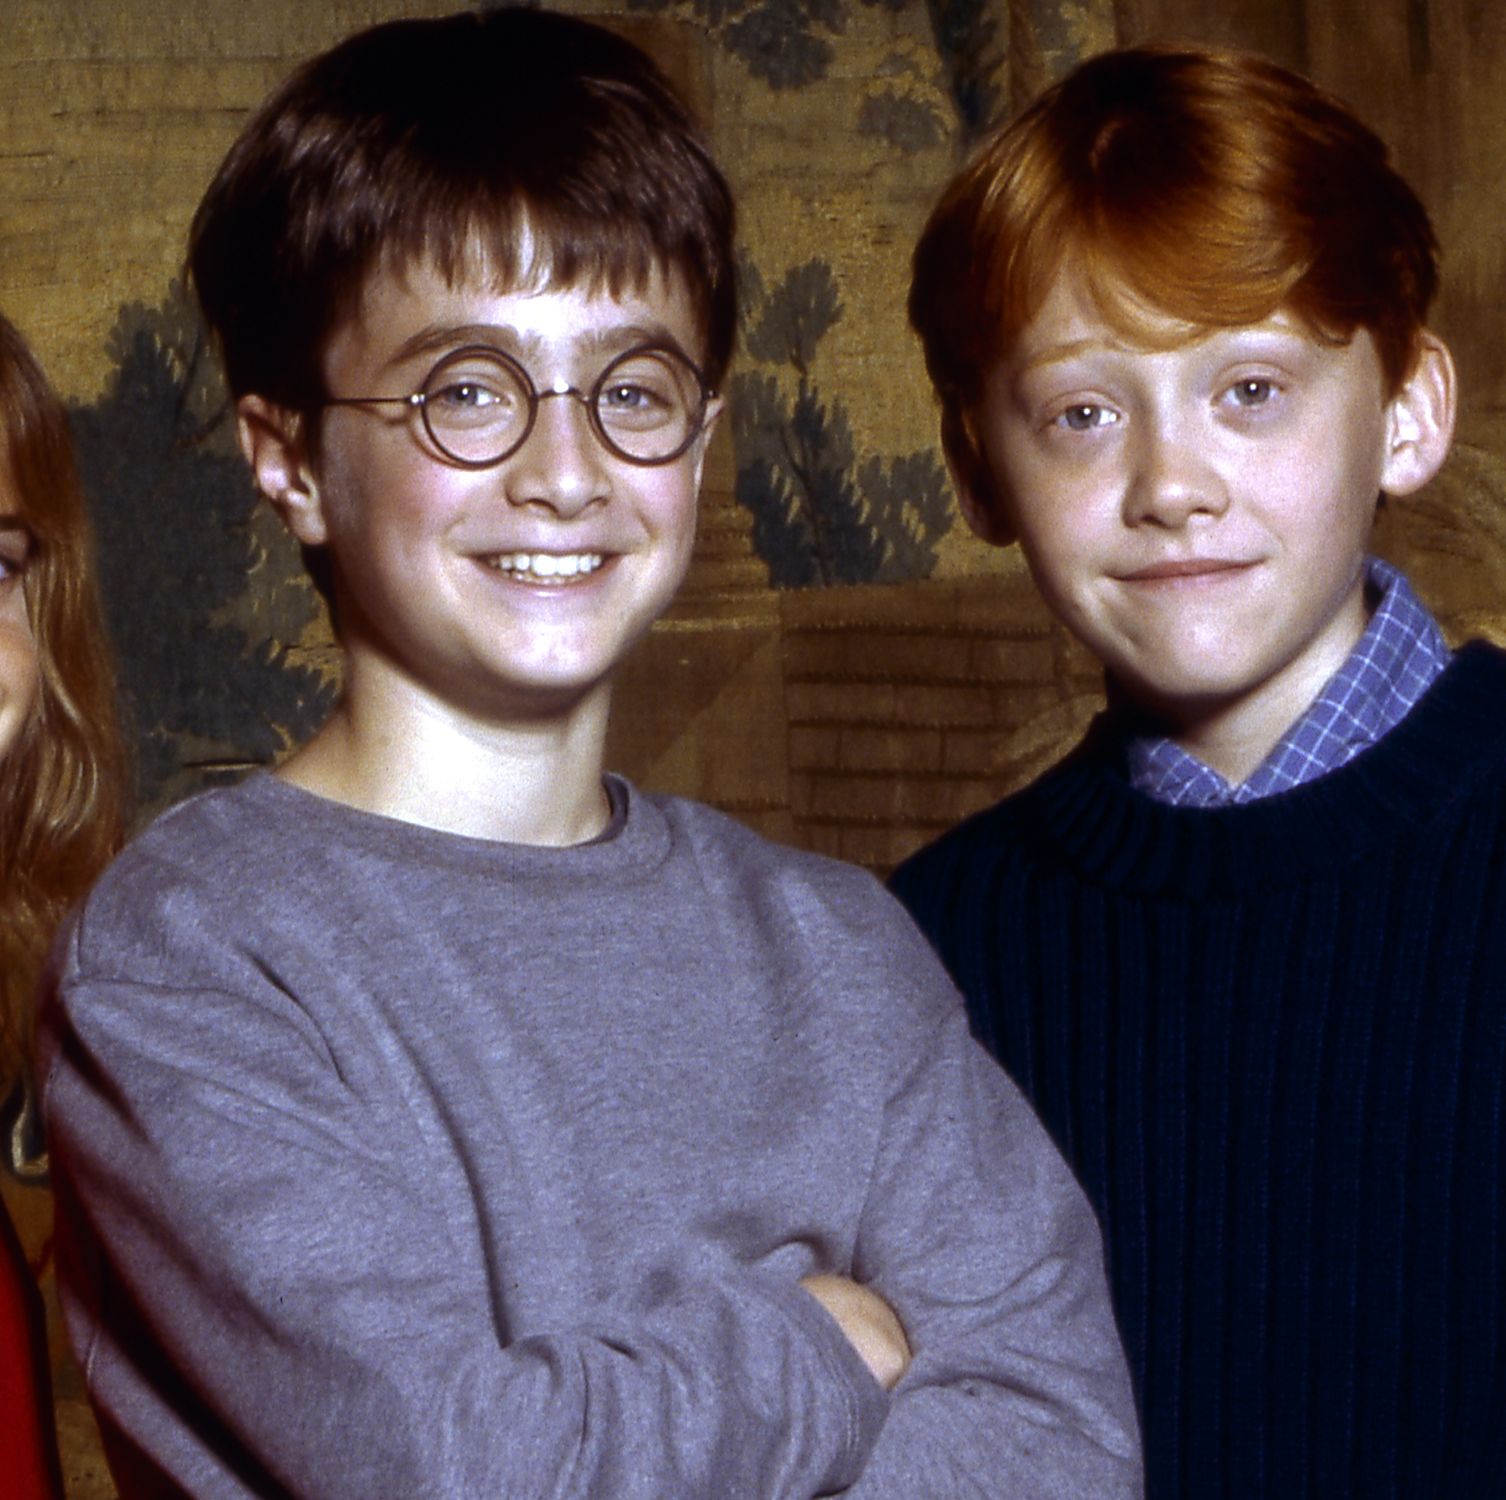 Harry Potter 20th Anniversary: Return to Hogwarts arrives to HBO Max on New Year's Day. 